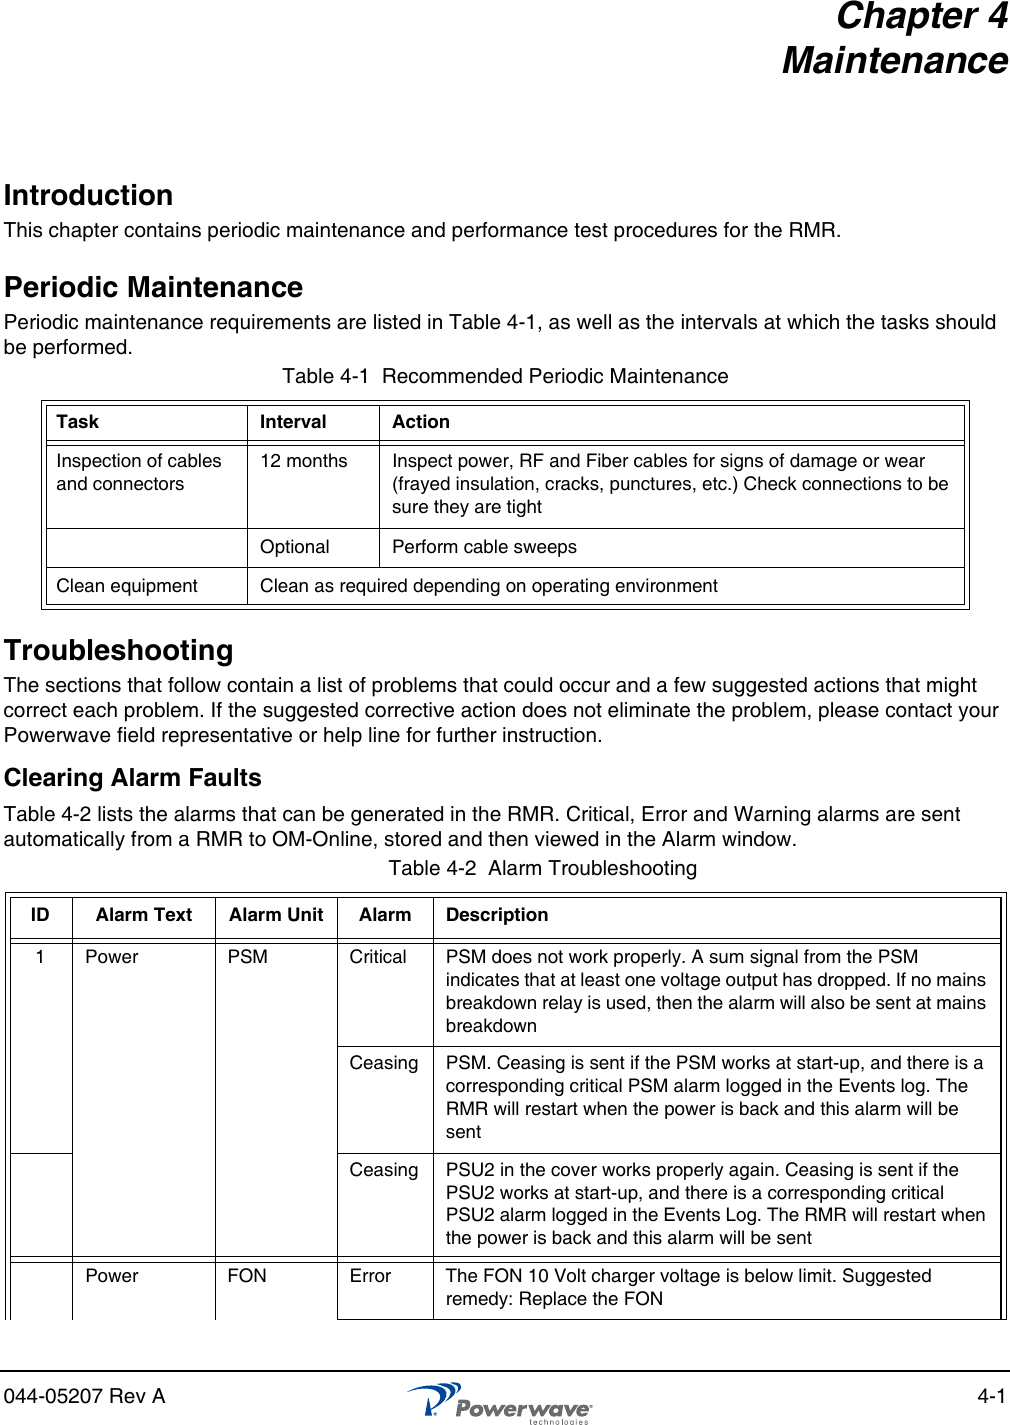 044-05207 Rev A 4-1Chapter 4MaintenanceIntroductionThis chapter contains periodic maintenance and performance test procedures for the RMR.Periodic MaintenancePeriodic maintenance requirements are listed in Table 4-1, as well as the intervals at which the tasks should be performed.TroubleshootingThe sections that follow contain a list of problems that could occur and a few suggested actions that might correct each problem. If the suggested corrective action does not eliminate the problem, please contact your Powerwave field representative or help line for further instruction.Clearing Alarm FaultsTable 4-2 lists the alarms that can be generated in the RMR. Critical, Error and Warning alarms are sent automatically from a RMR to OM-Online, stored and then viewed in the Alarm window.Table 4-1  Recommended Periodic MaintenanceTask Interval ActionInspection of cables and connectors12 months Inspect power, RF and Fiber cables for signs of damage or wear (frayed insulation, cracks, punctures, etc.) Check connections to be sure they are tightOptional Perform cable sweepsClean equipment Clean as required depending on operating environmentTable 4-2  Alarm TroubleshootingID Alarm Text Alarm Unit Alarm Description1 Power PSM Critical PSM does not work properly. A sum signal from the PSM indicates that at least one voltage output has dropped. If no mains breakdown relay is used, then the alarm will also be sent at mains breakdownCeasing PSM. Ceasing is sent if the PSM works at start-up, and there is a corresponding critical PSM alarm logged in the Events log. The RMR will restart when the power is back and this alarm will be sentCeasing PSU2 in the cover works properly again. Ceasing is sent if the PSU2 works at start-up, and there is a corresponding critical PSU2 alarm logged in the Events Log. The RMR will restart when the power is back and this alarm will be sentPower FON Error The FON 10 Volt charger voltage is below limit. Suggested remedy: Replace the FON